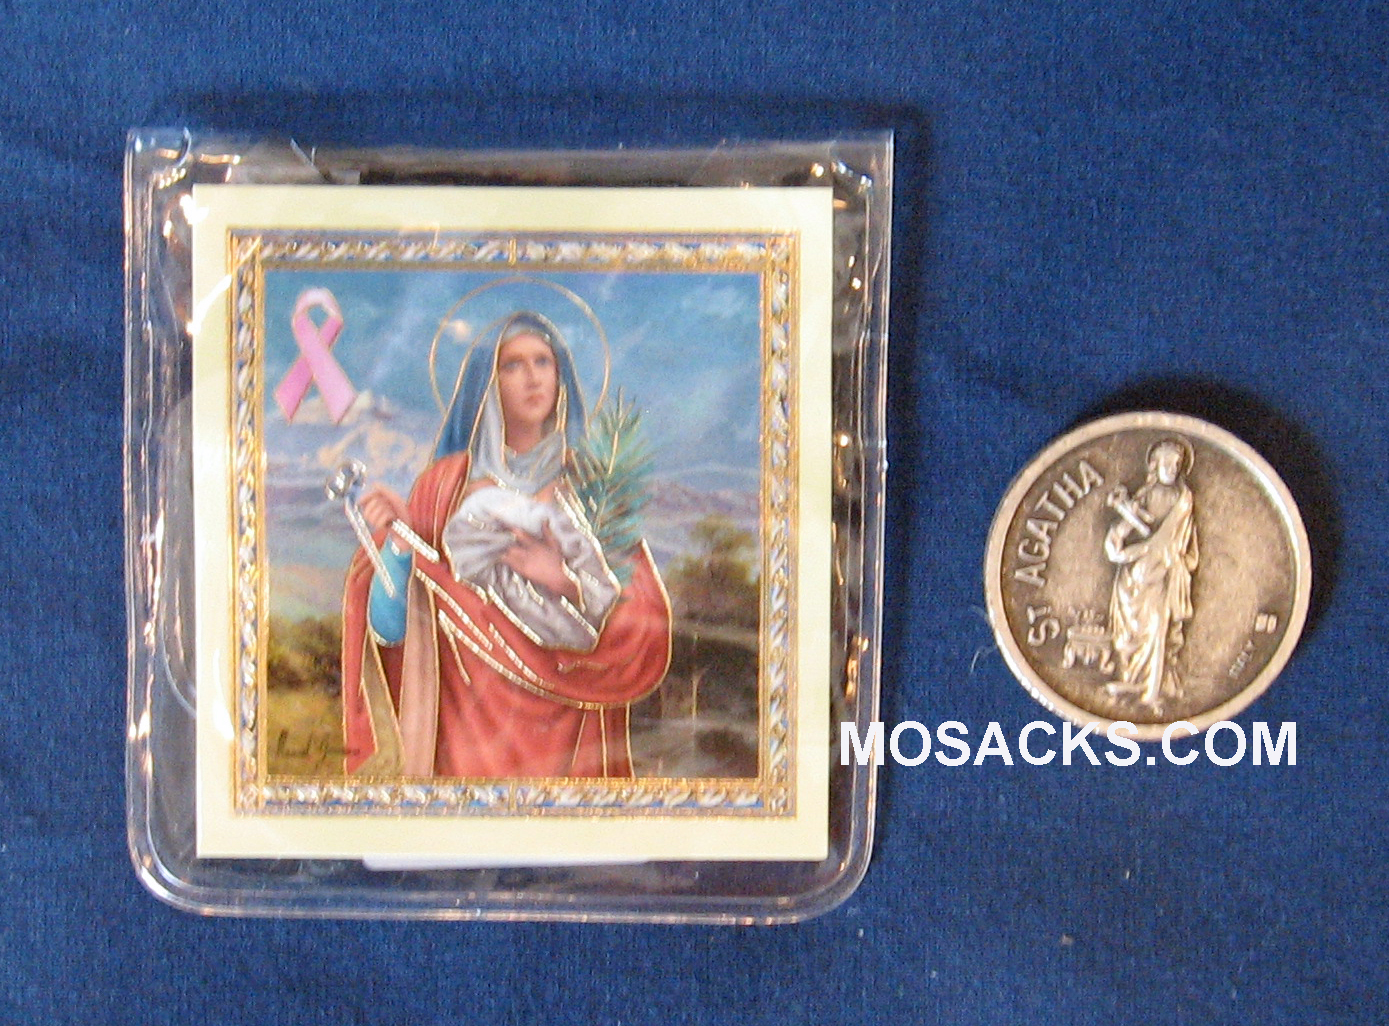 St. Agatha Pocket Coin Patroness Against Breast Disease with St. Peregrine, Patron Saint Against Cancer on the other side 968-531